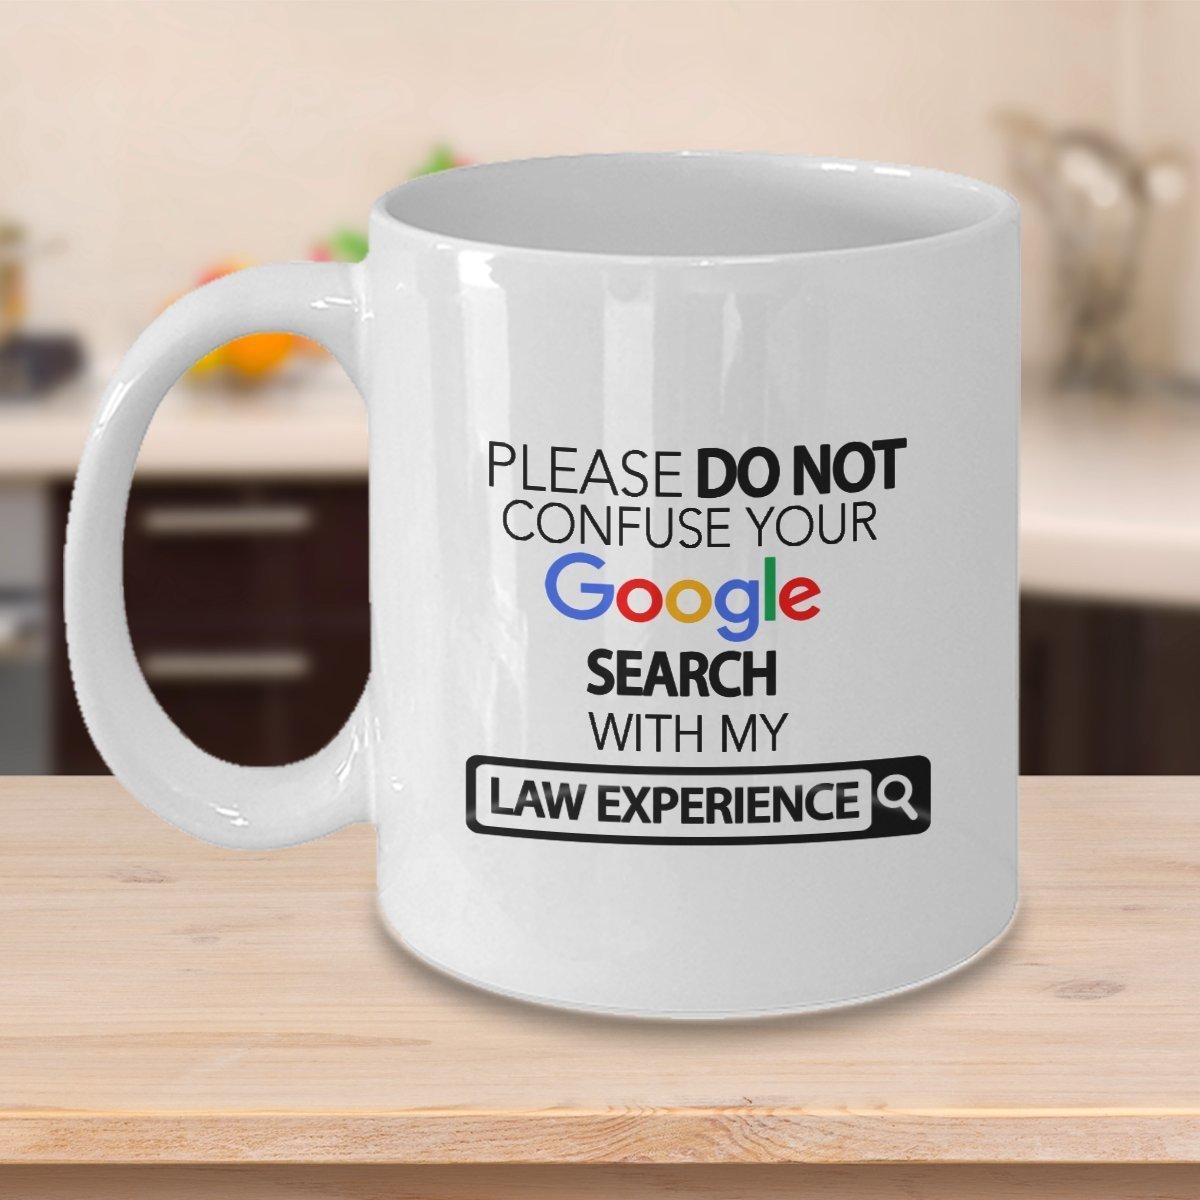 Law Mug - Please Do Not Confuse Your Google Search With My Law Experience - Law Lawyer Gifts Coffee Cup Accessories Funny Unique Gift Idea